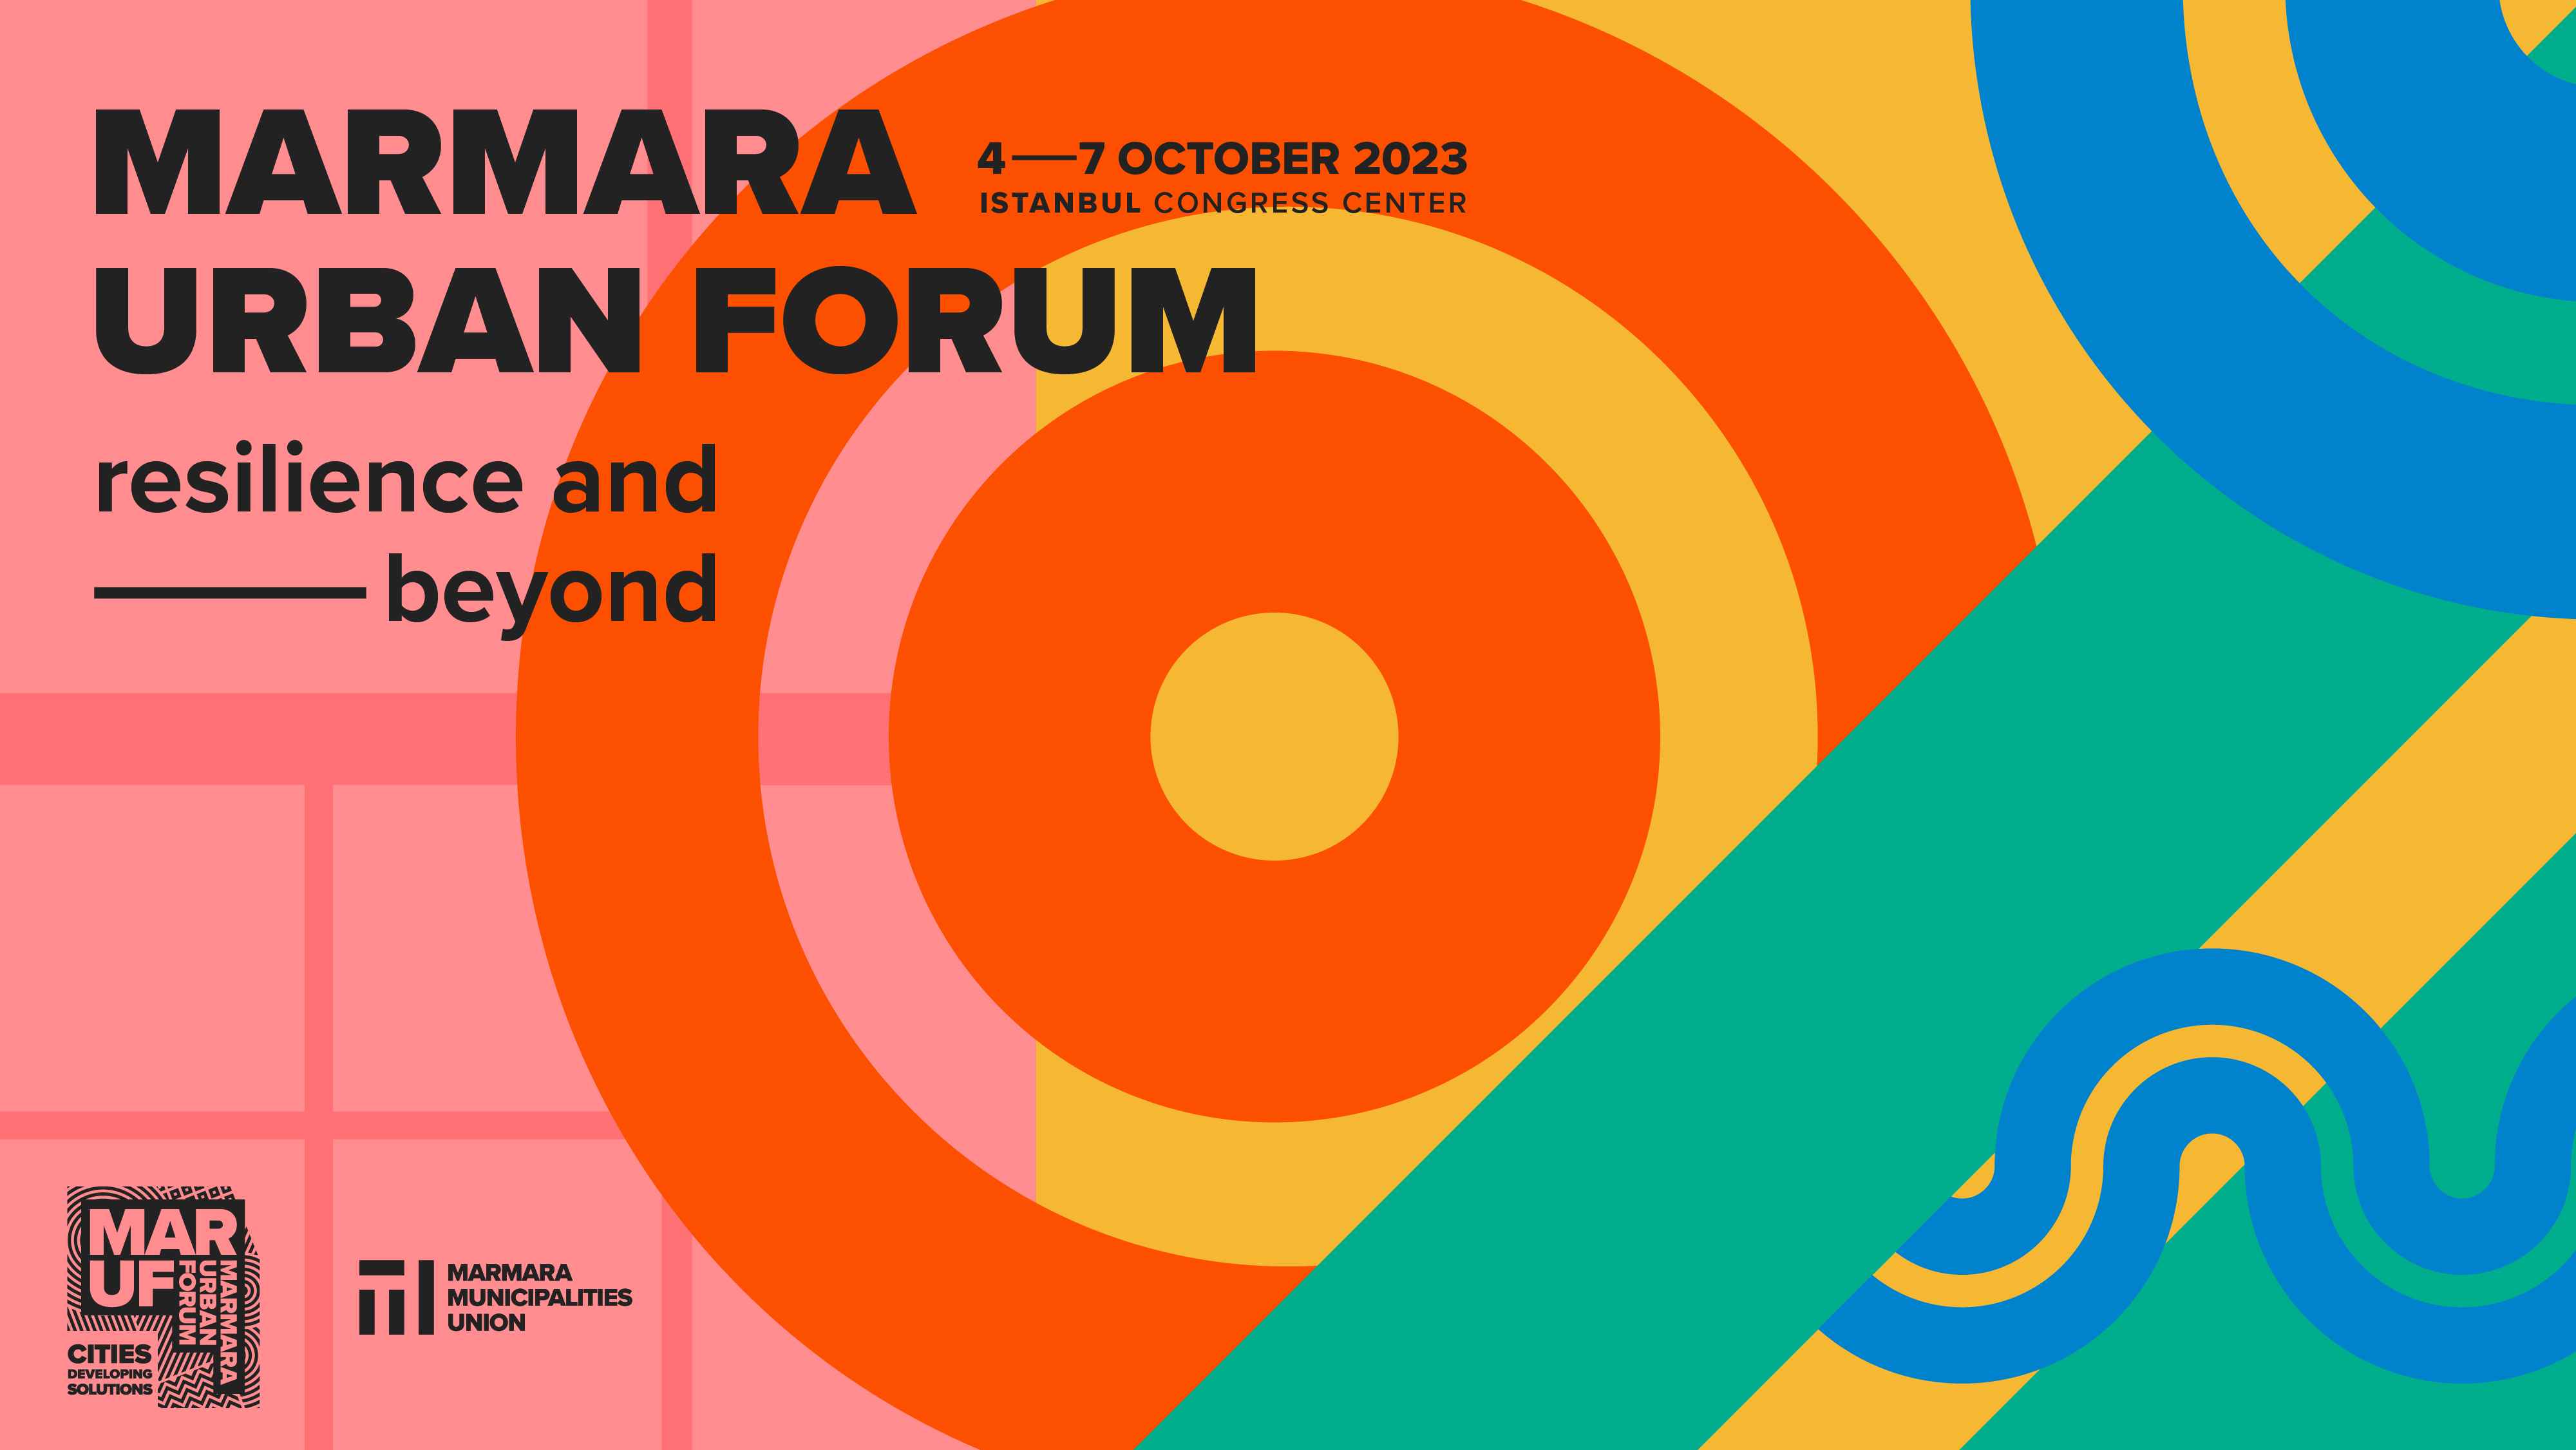 Save the date for Marmara Urban Forum & meet us in Istanbul!